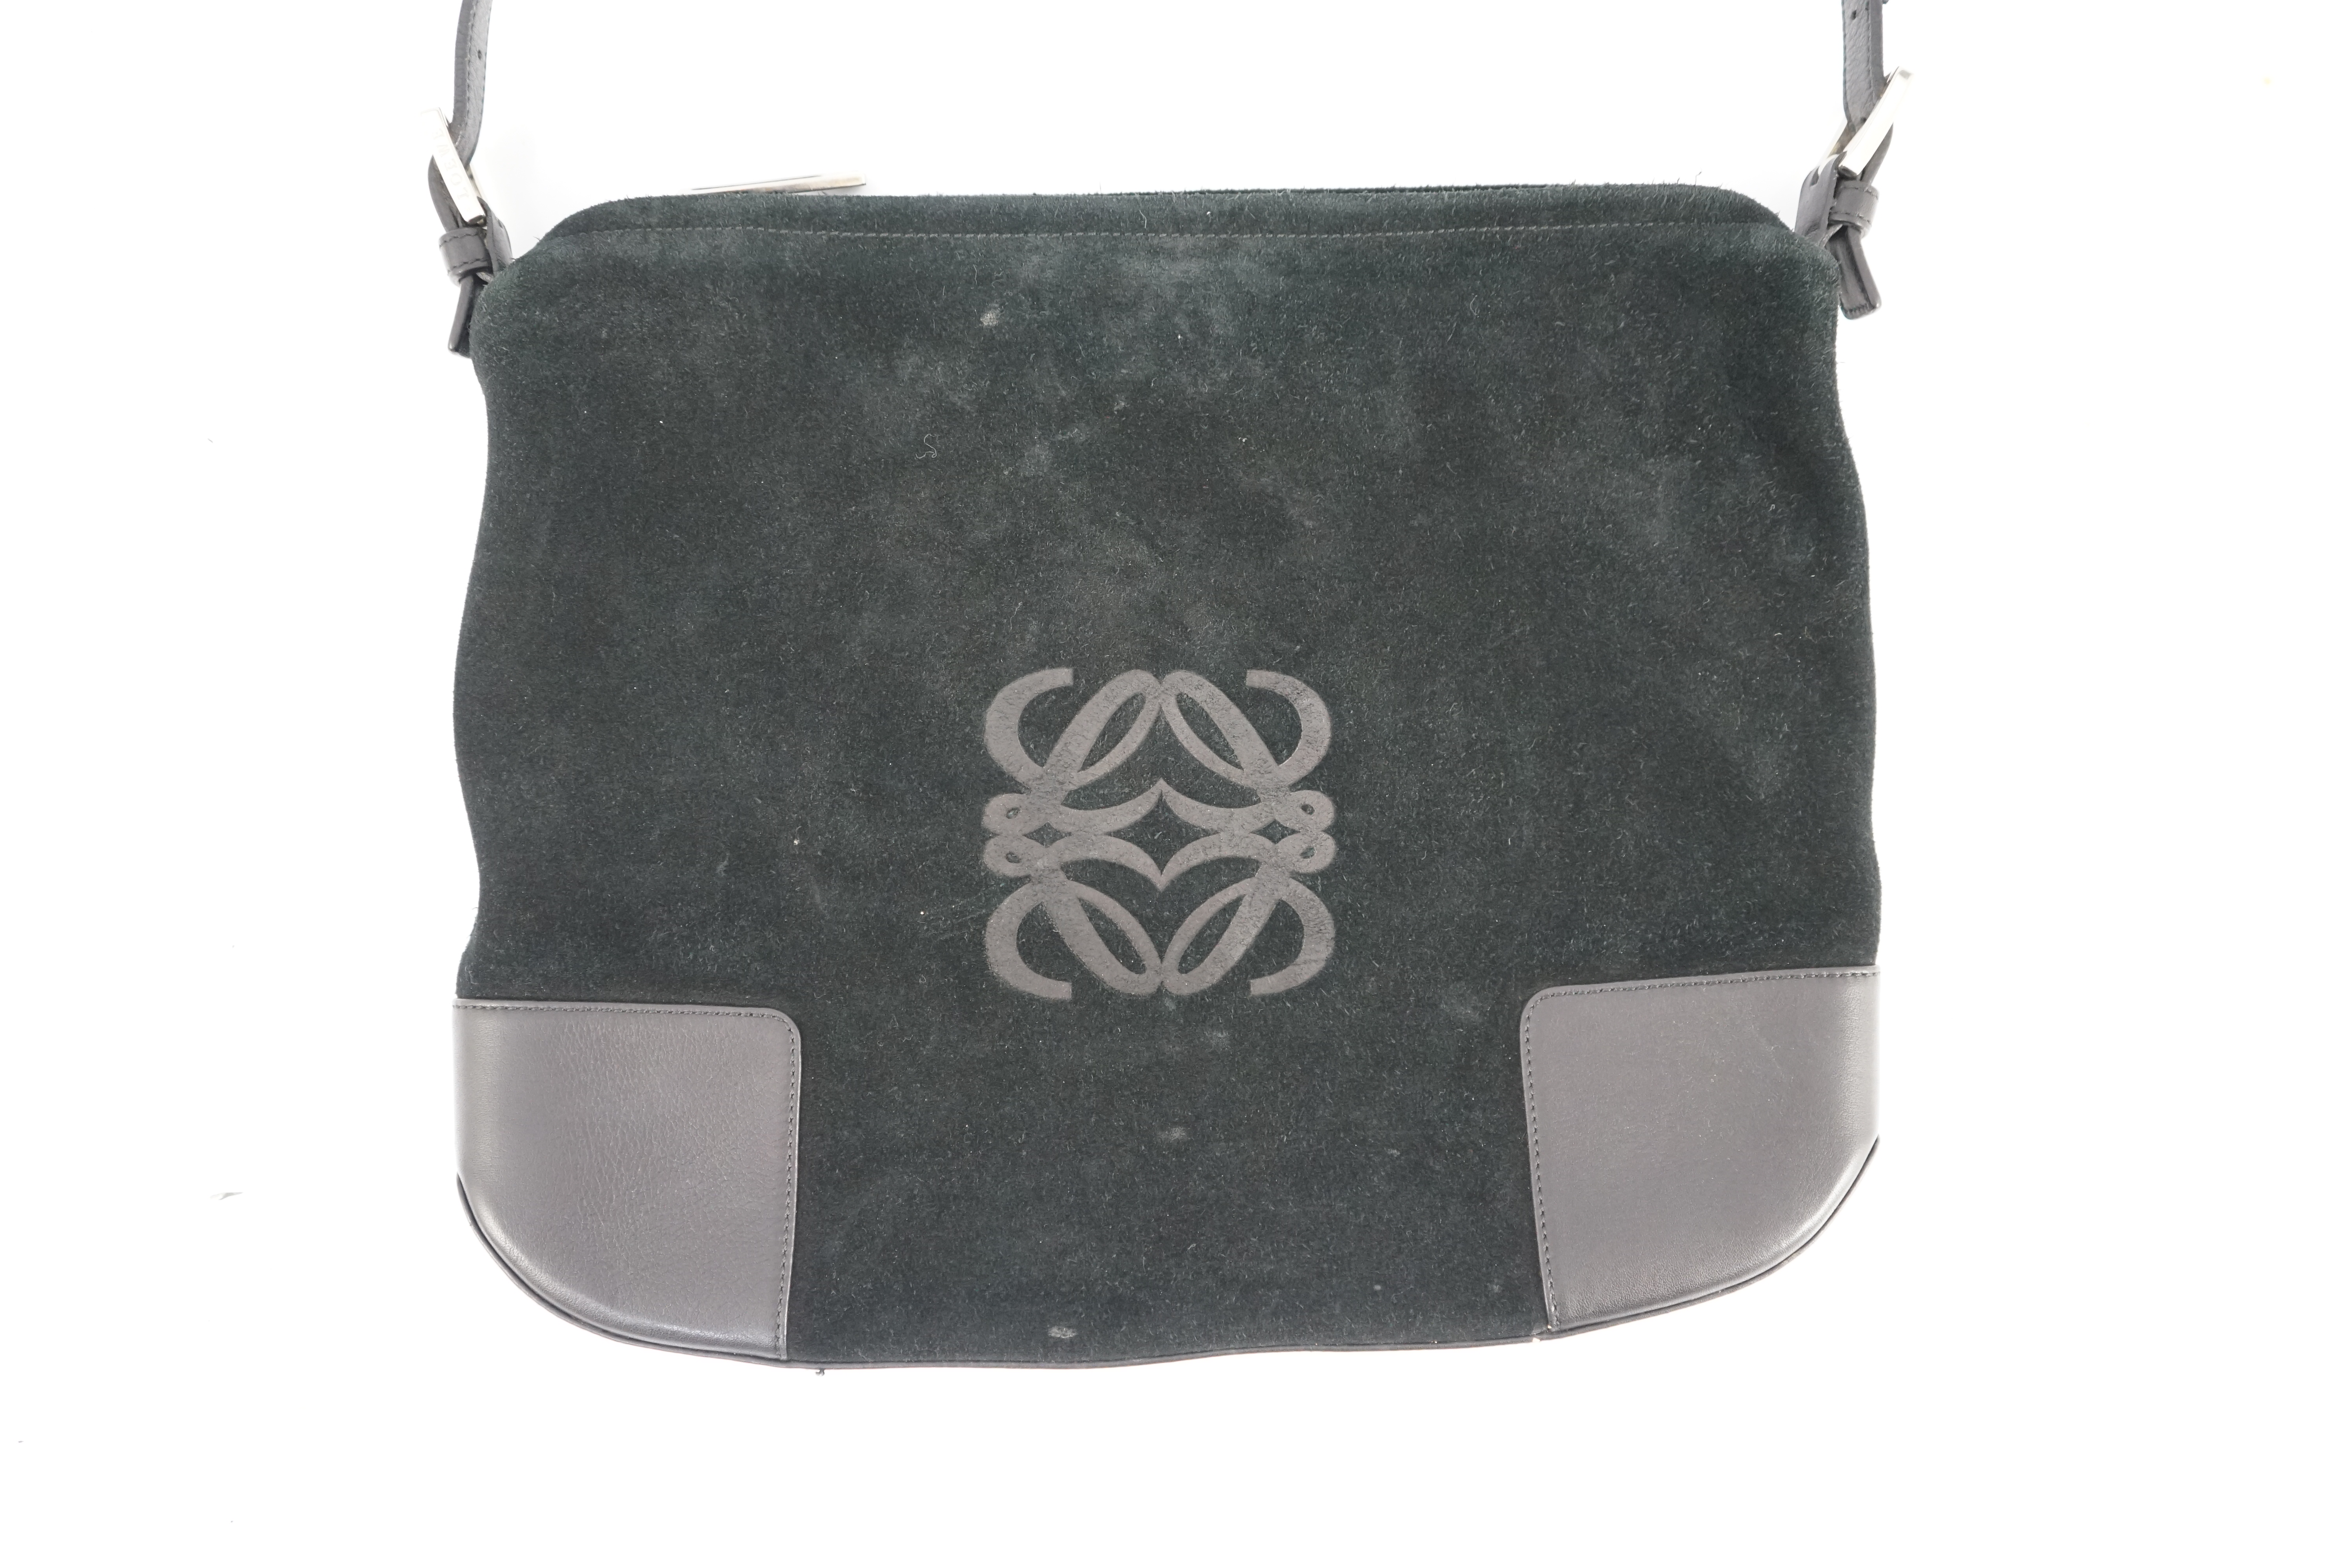 A Loewe black suede and leather shoulder bag and purse, bag width 34cm, depth 3cm, height 28cm, purse width 16.5cm, height 12cm